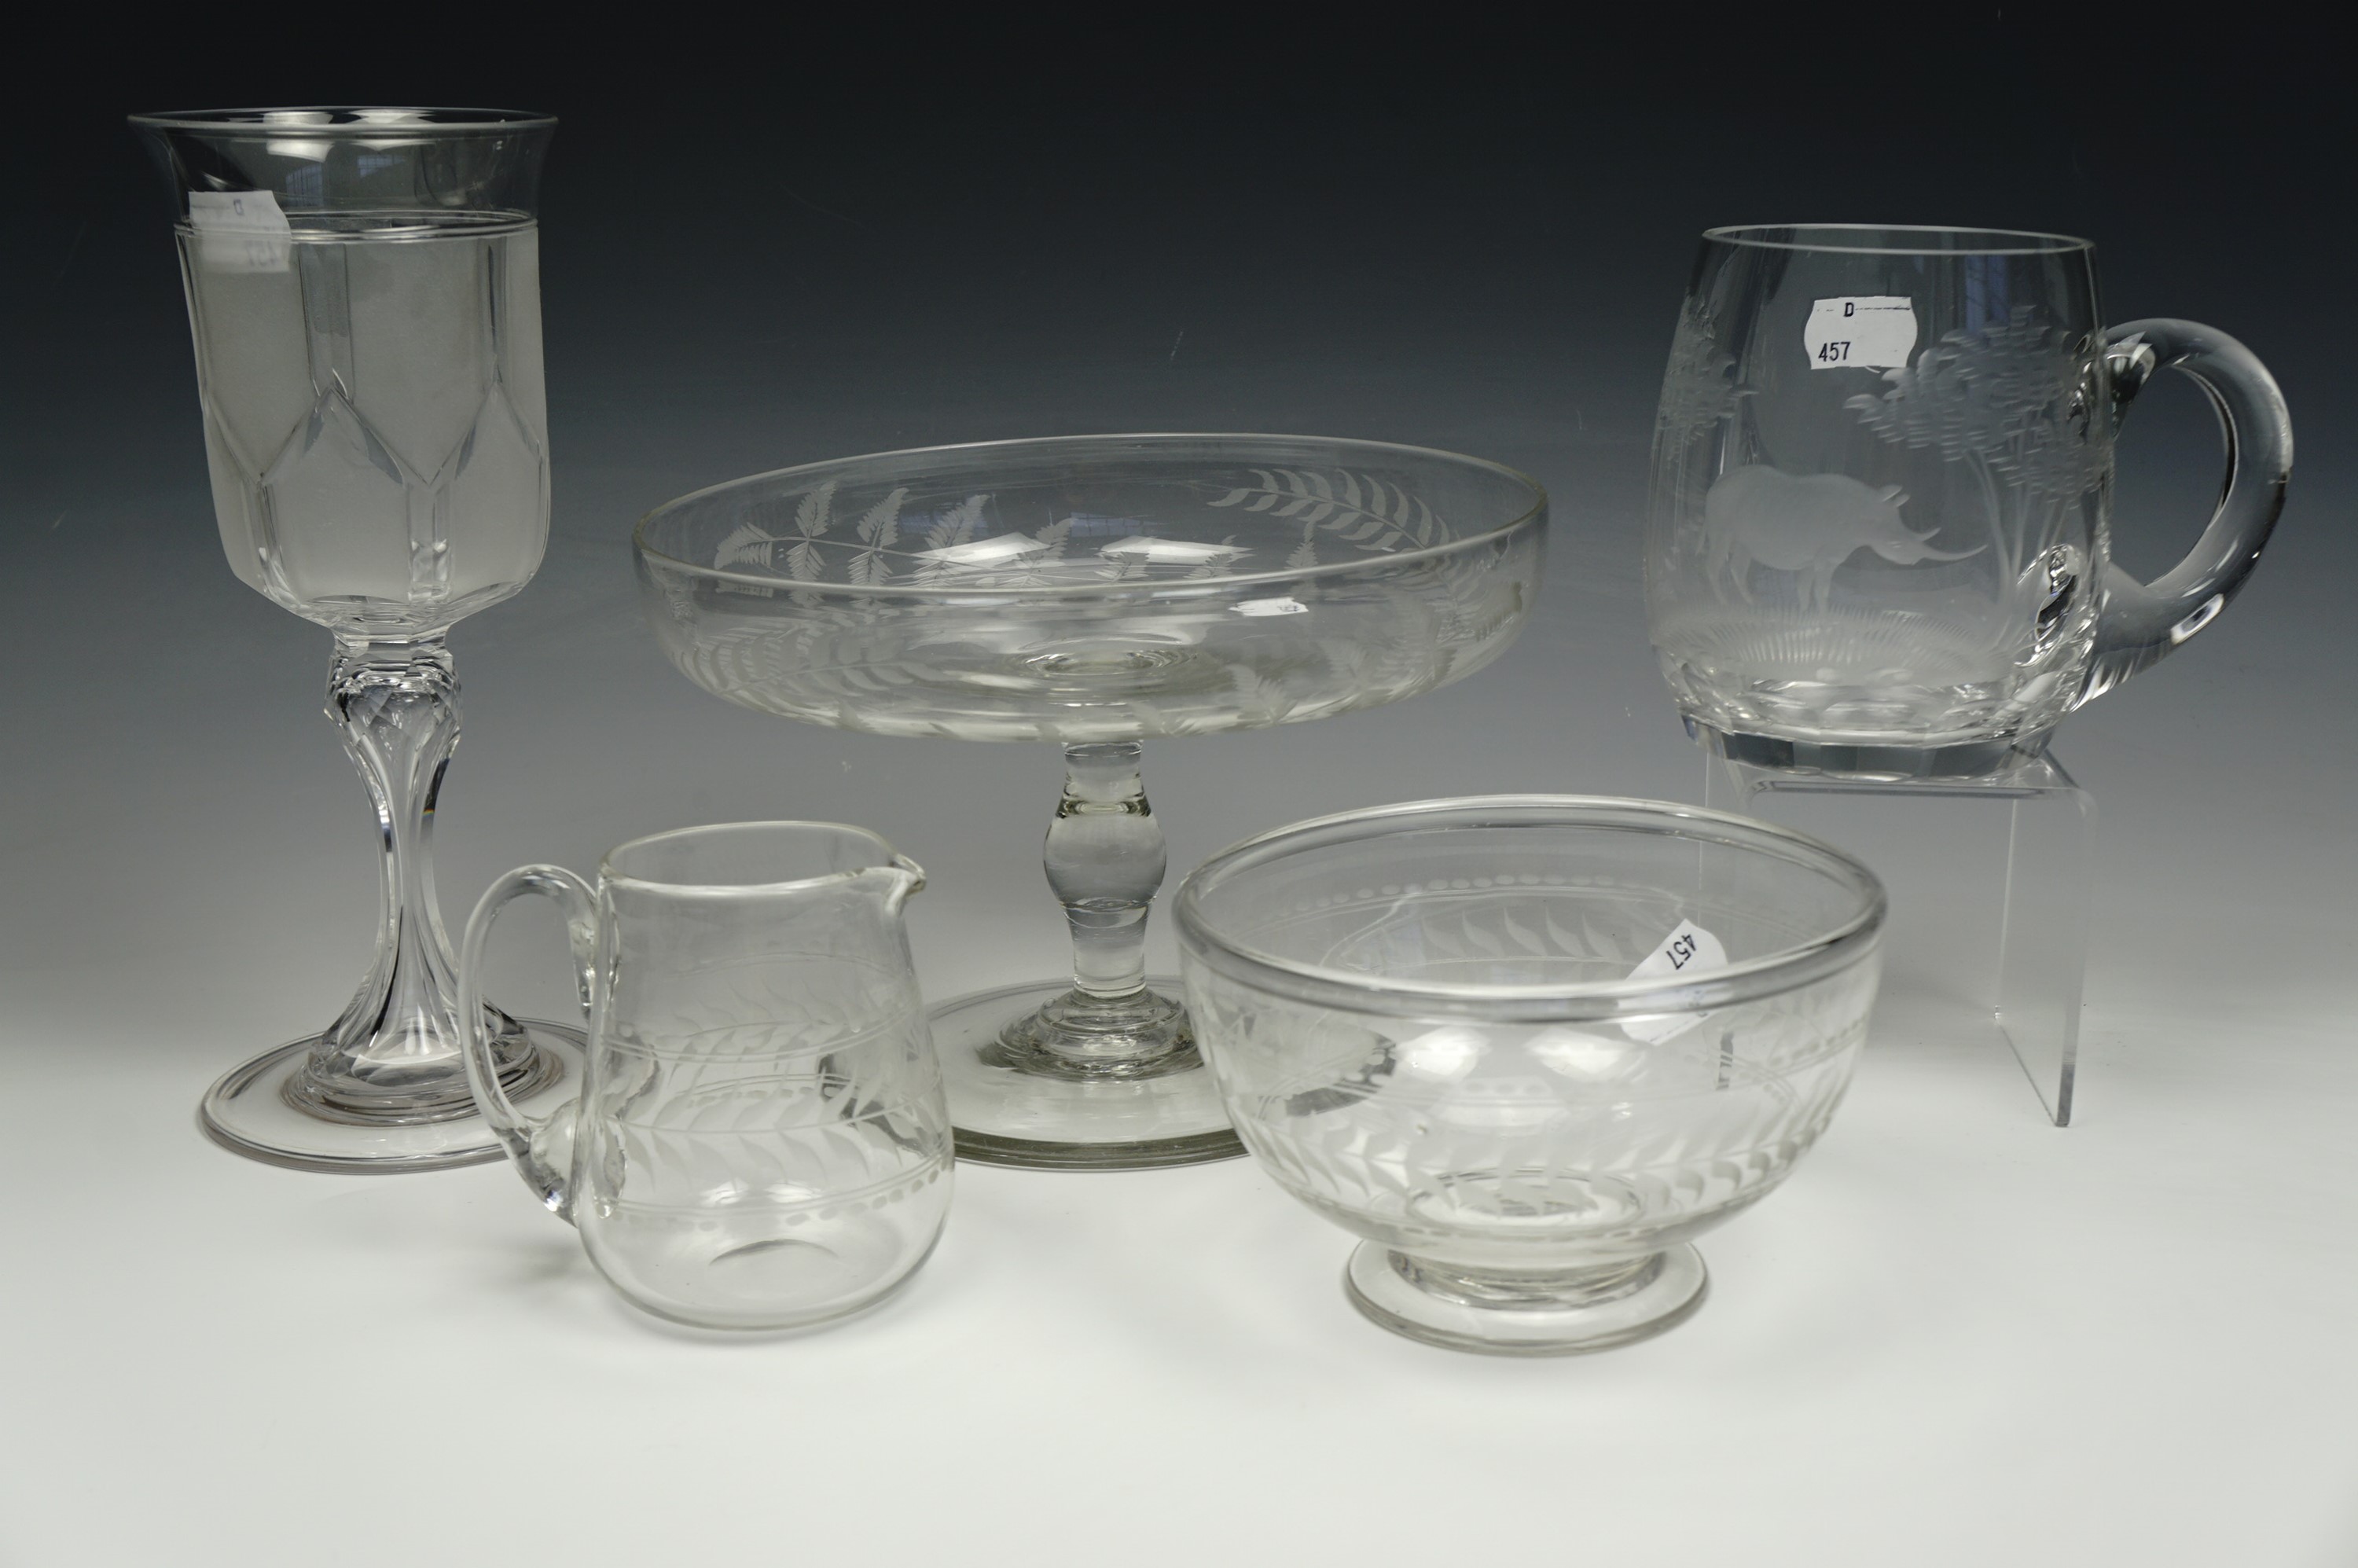 A Victorian glass sugar bowl and milk jug, together with a Victorian fern leaf decorated glass